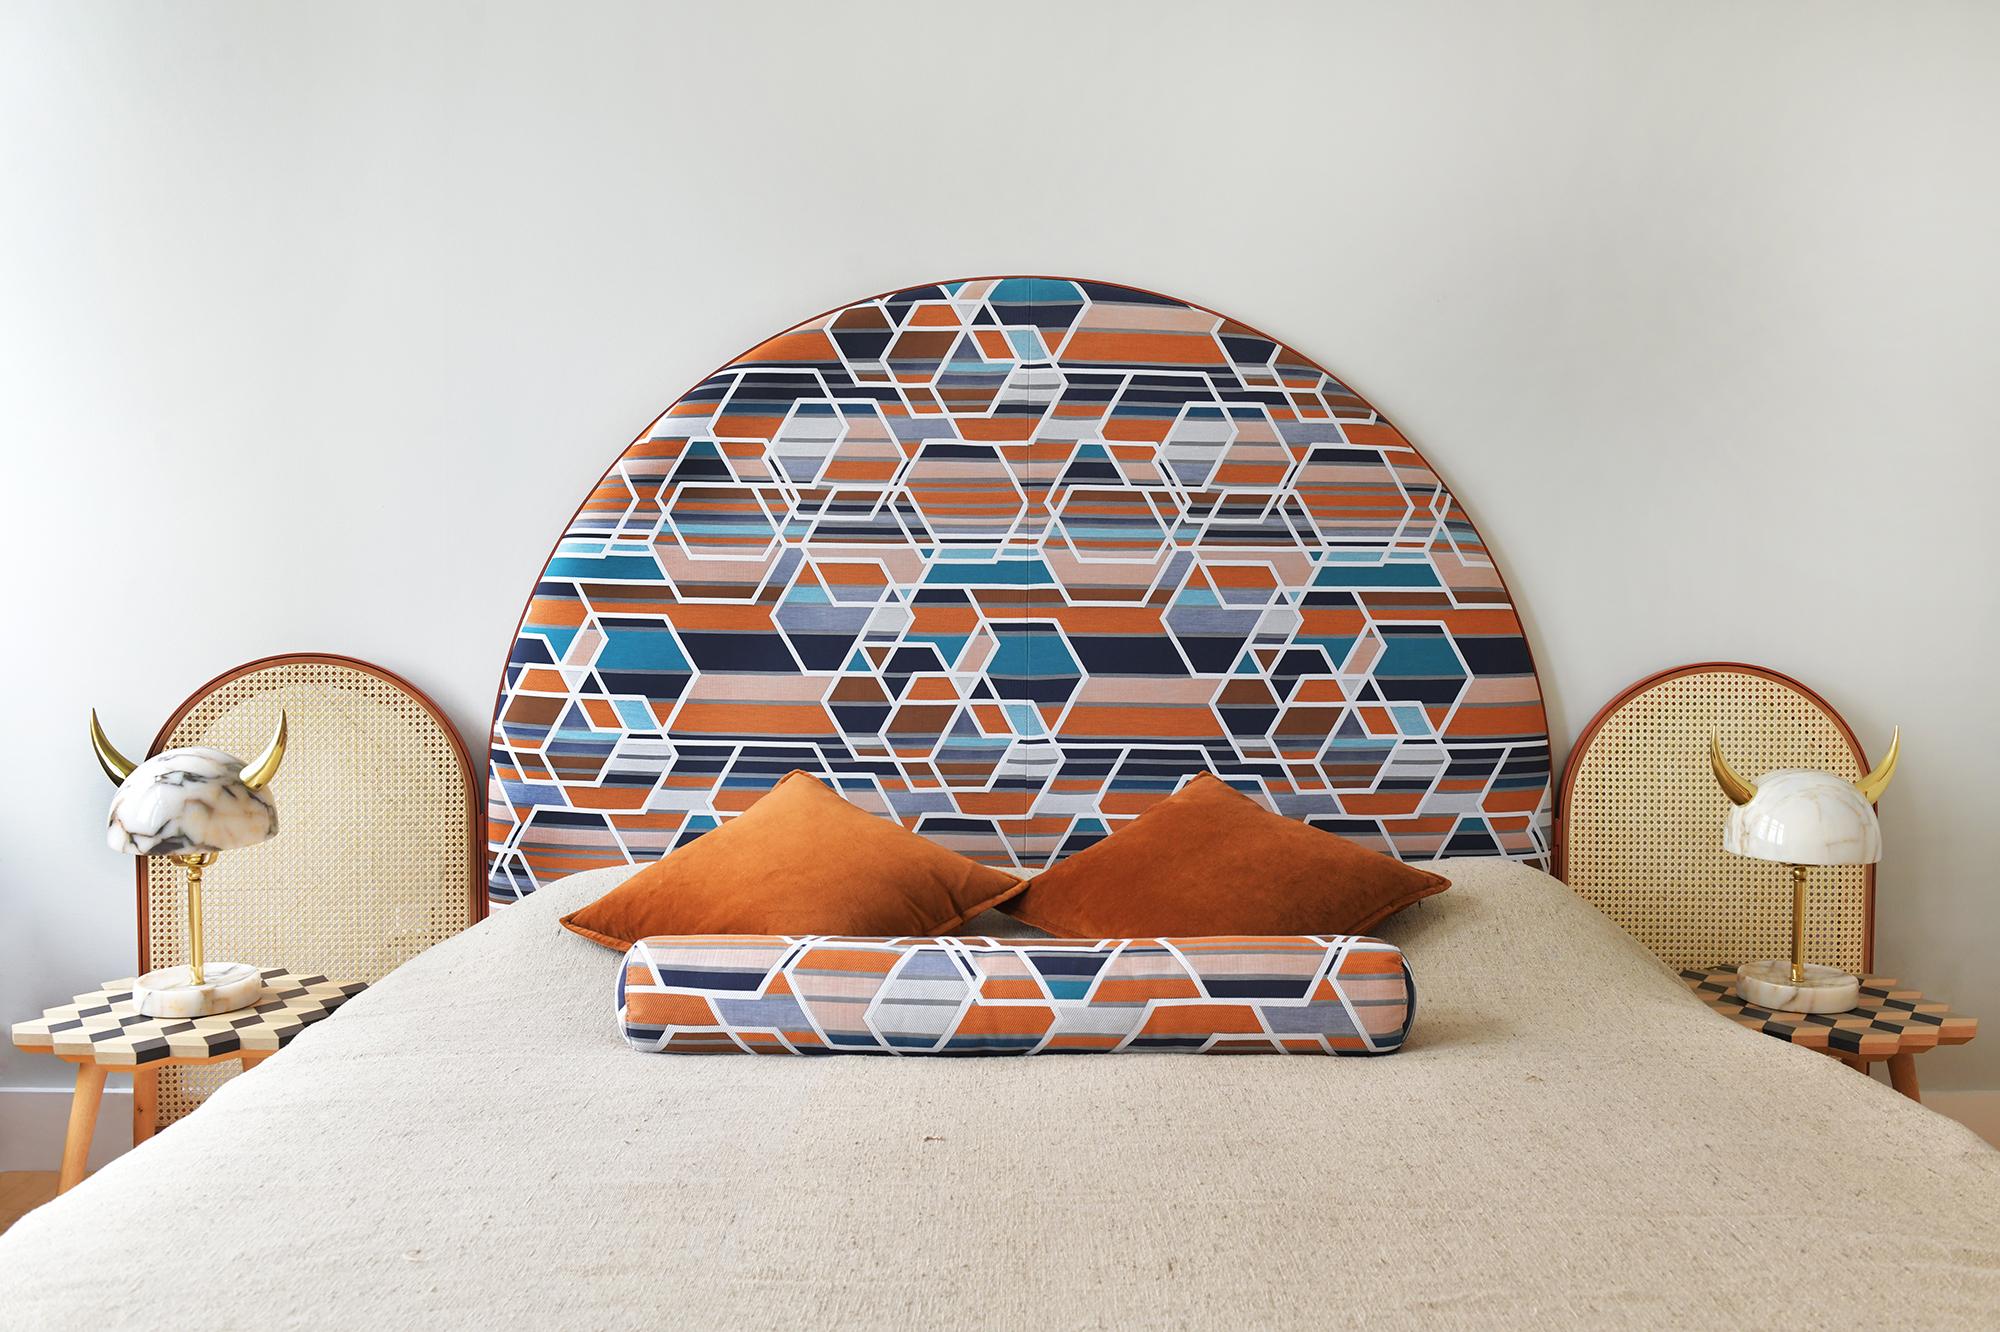 “Paravent Ideal” is a handcrafted, screen headboard made by artisans in Turkey, preserving and sustaining traditional Turkish handcrafts. The central large arc is upholstered in Maharam geometric fabric Agency, which has hues of burnt orange, blues